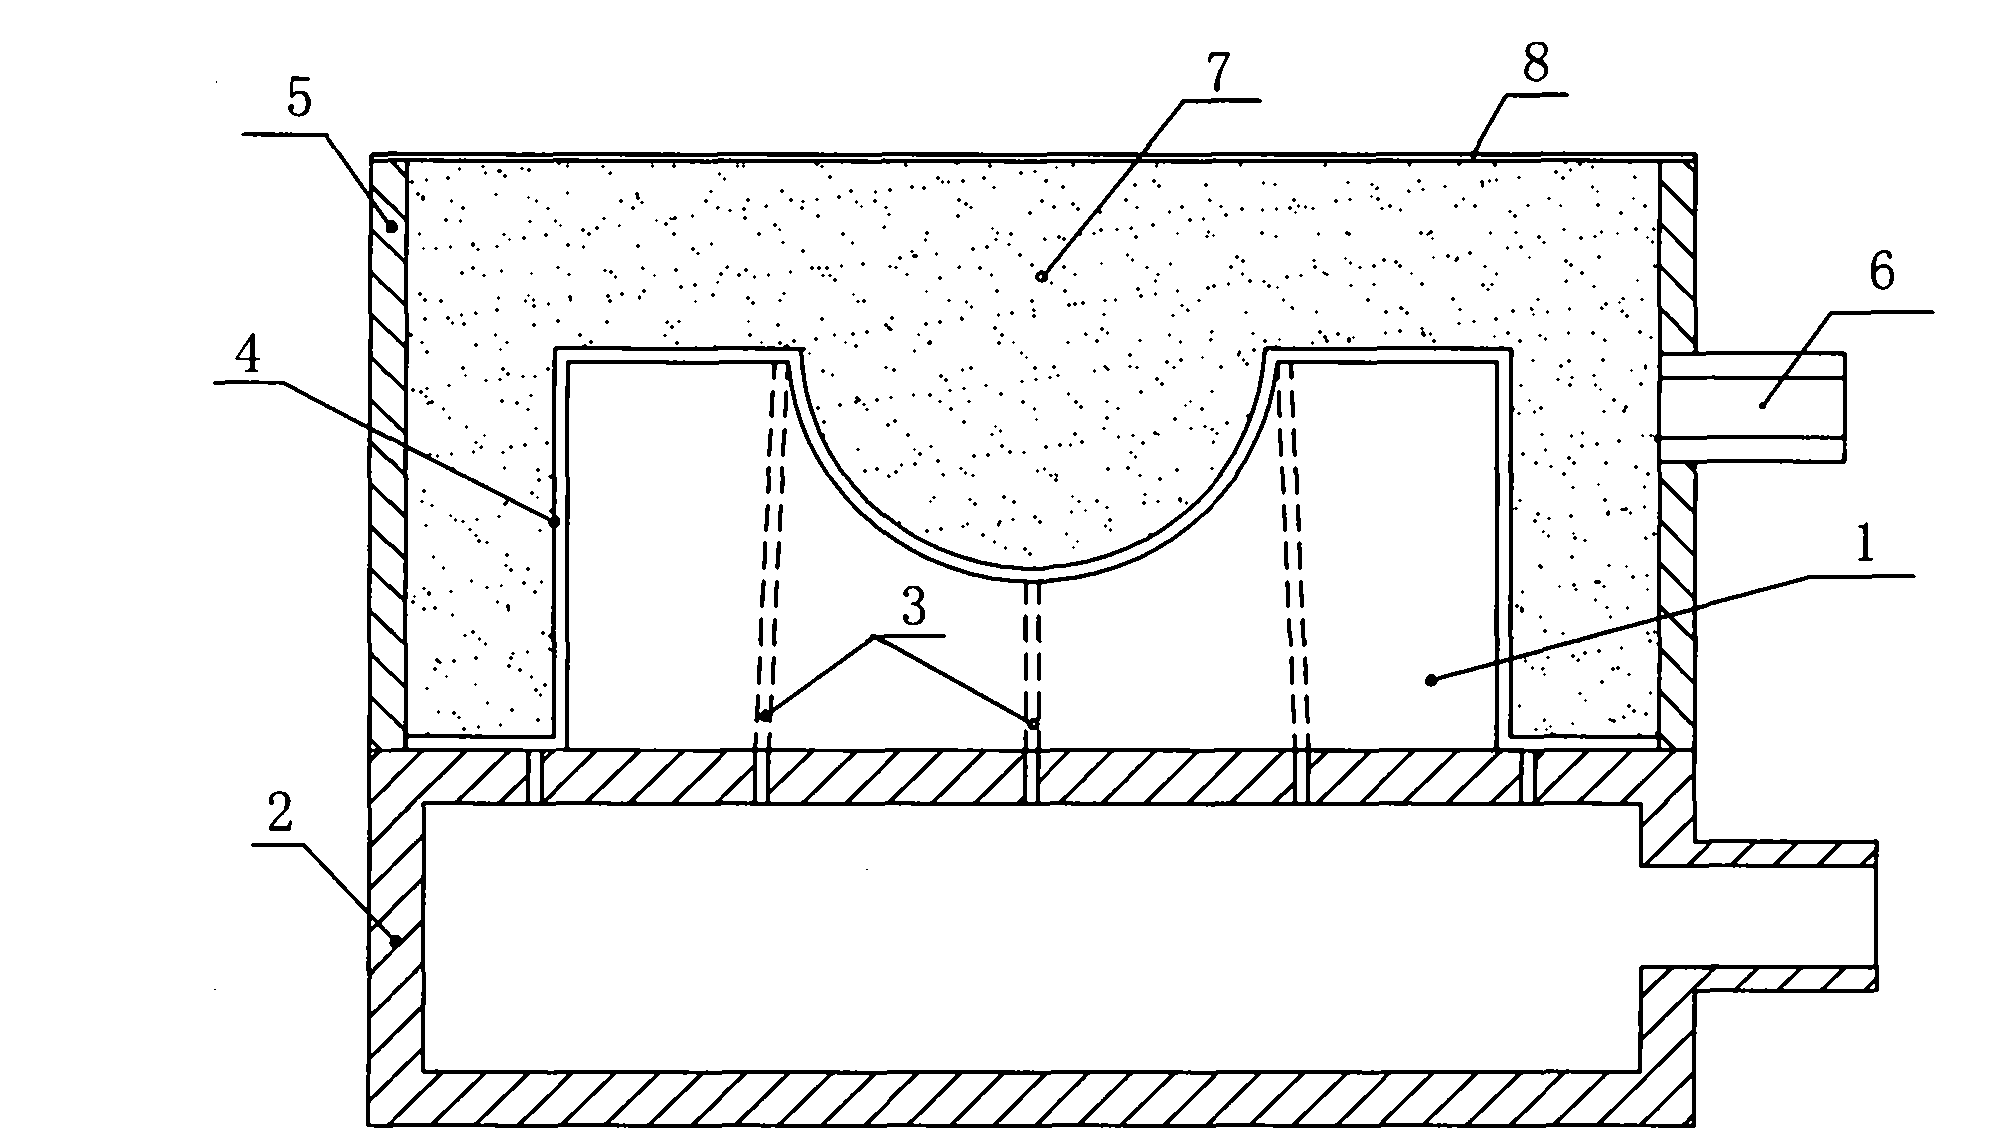 Negative-pressure molding process of casting refractory material product